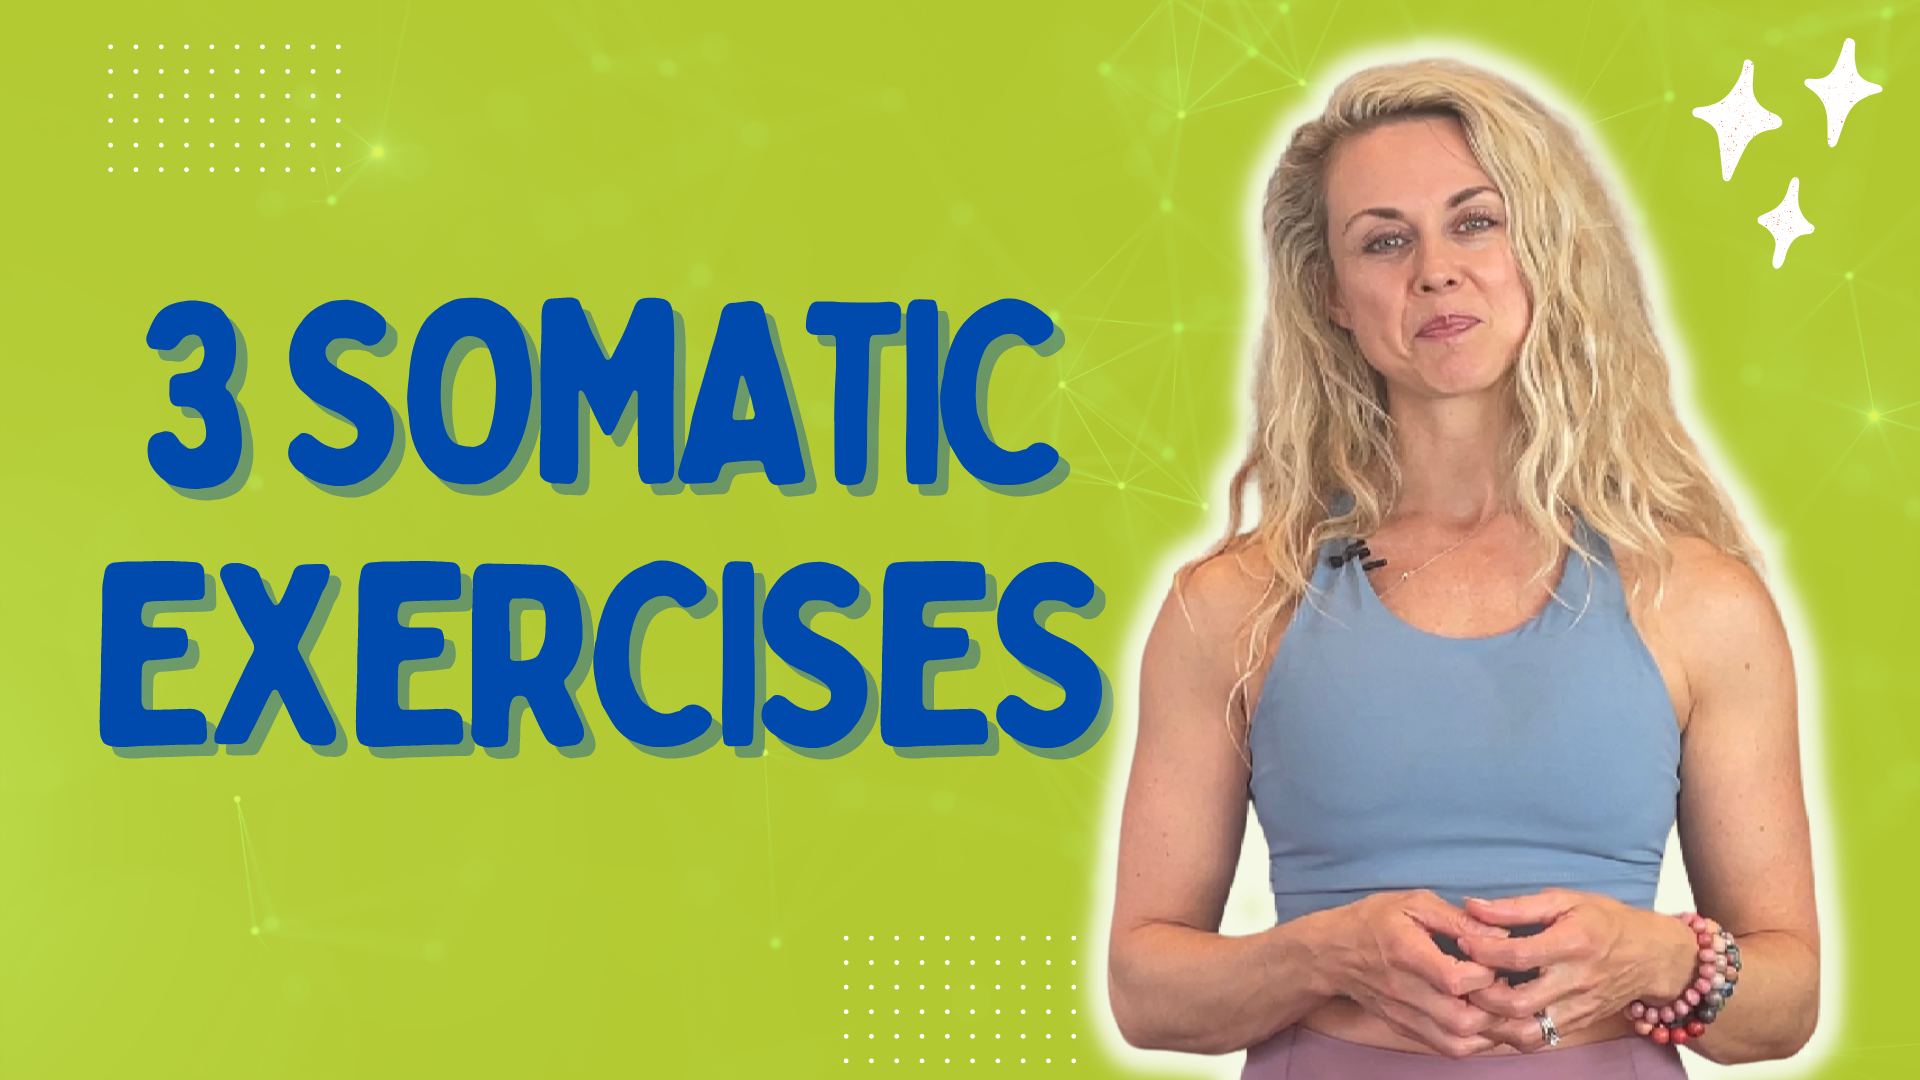 3 Somatic Exercises to Get You Out of Your Head Into Your Body